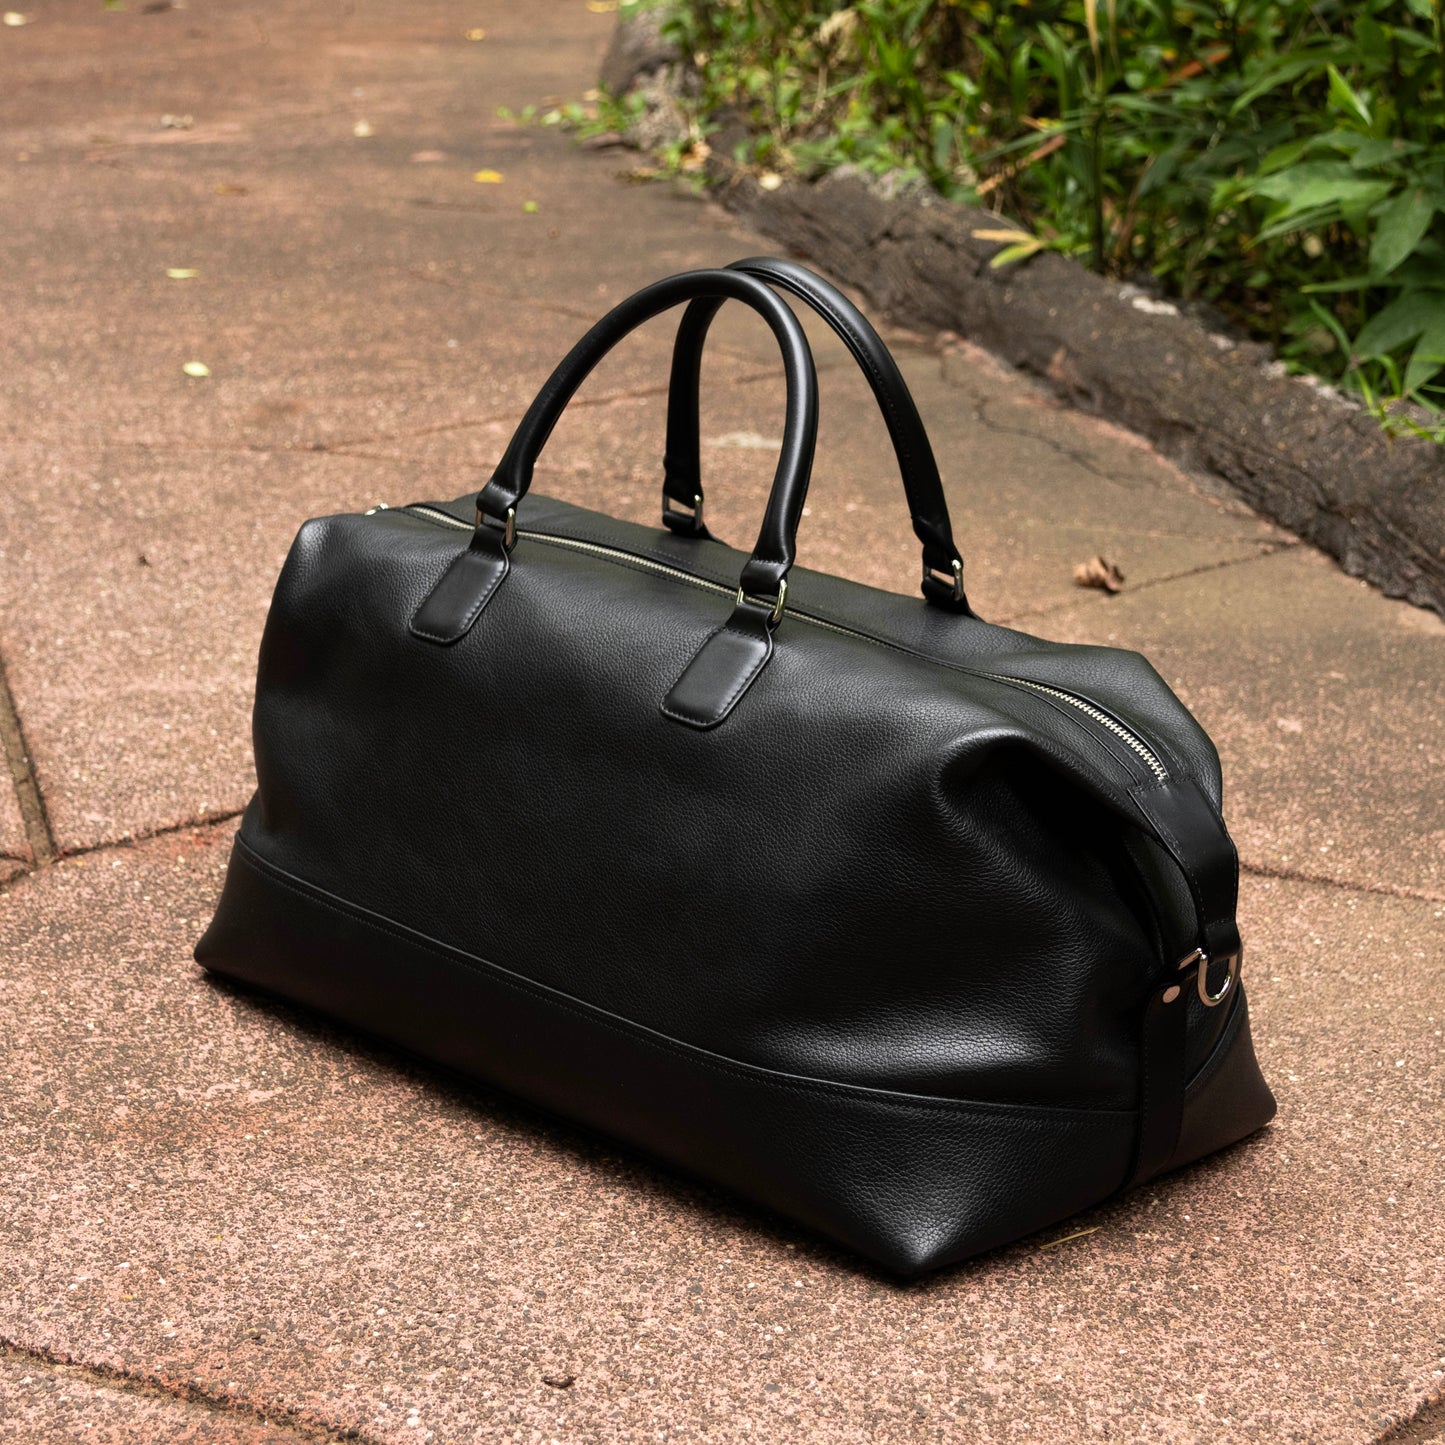 Leather Duffle Bag in Black. Designed with top handles and a zipper closure